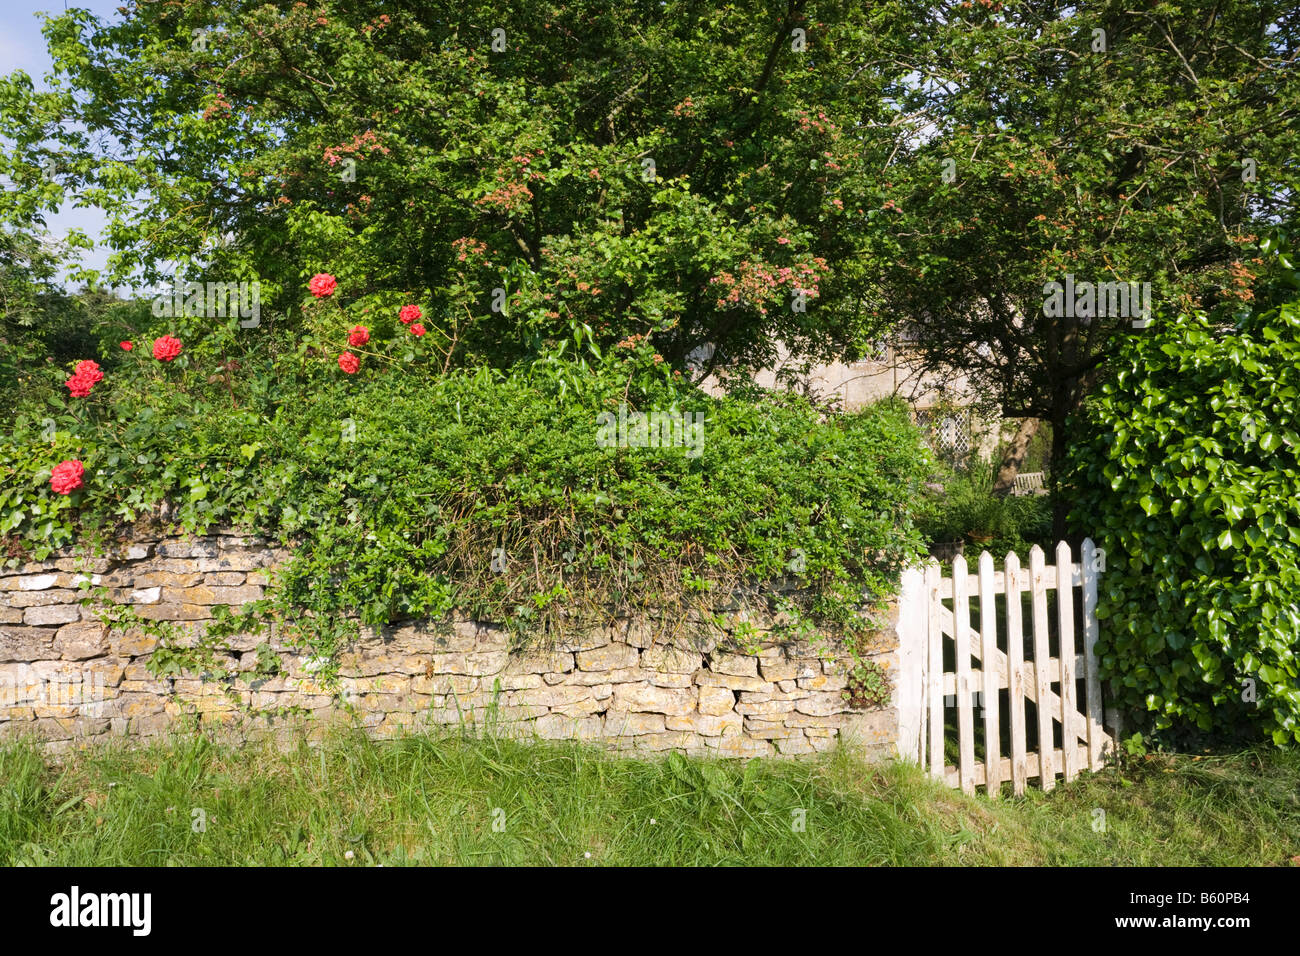 The garden wall round a rustic stone cottage in the Cotswold village of Swinbrook, Oxfordshire Stock Photo